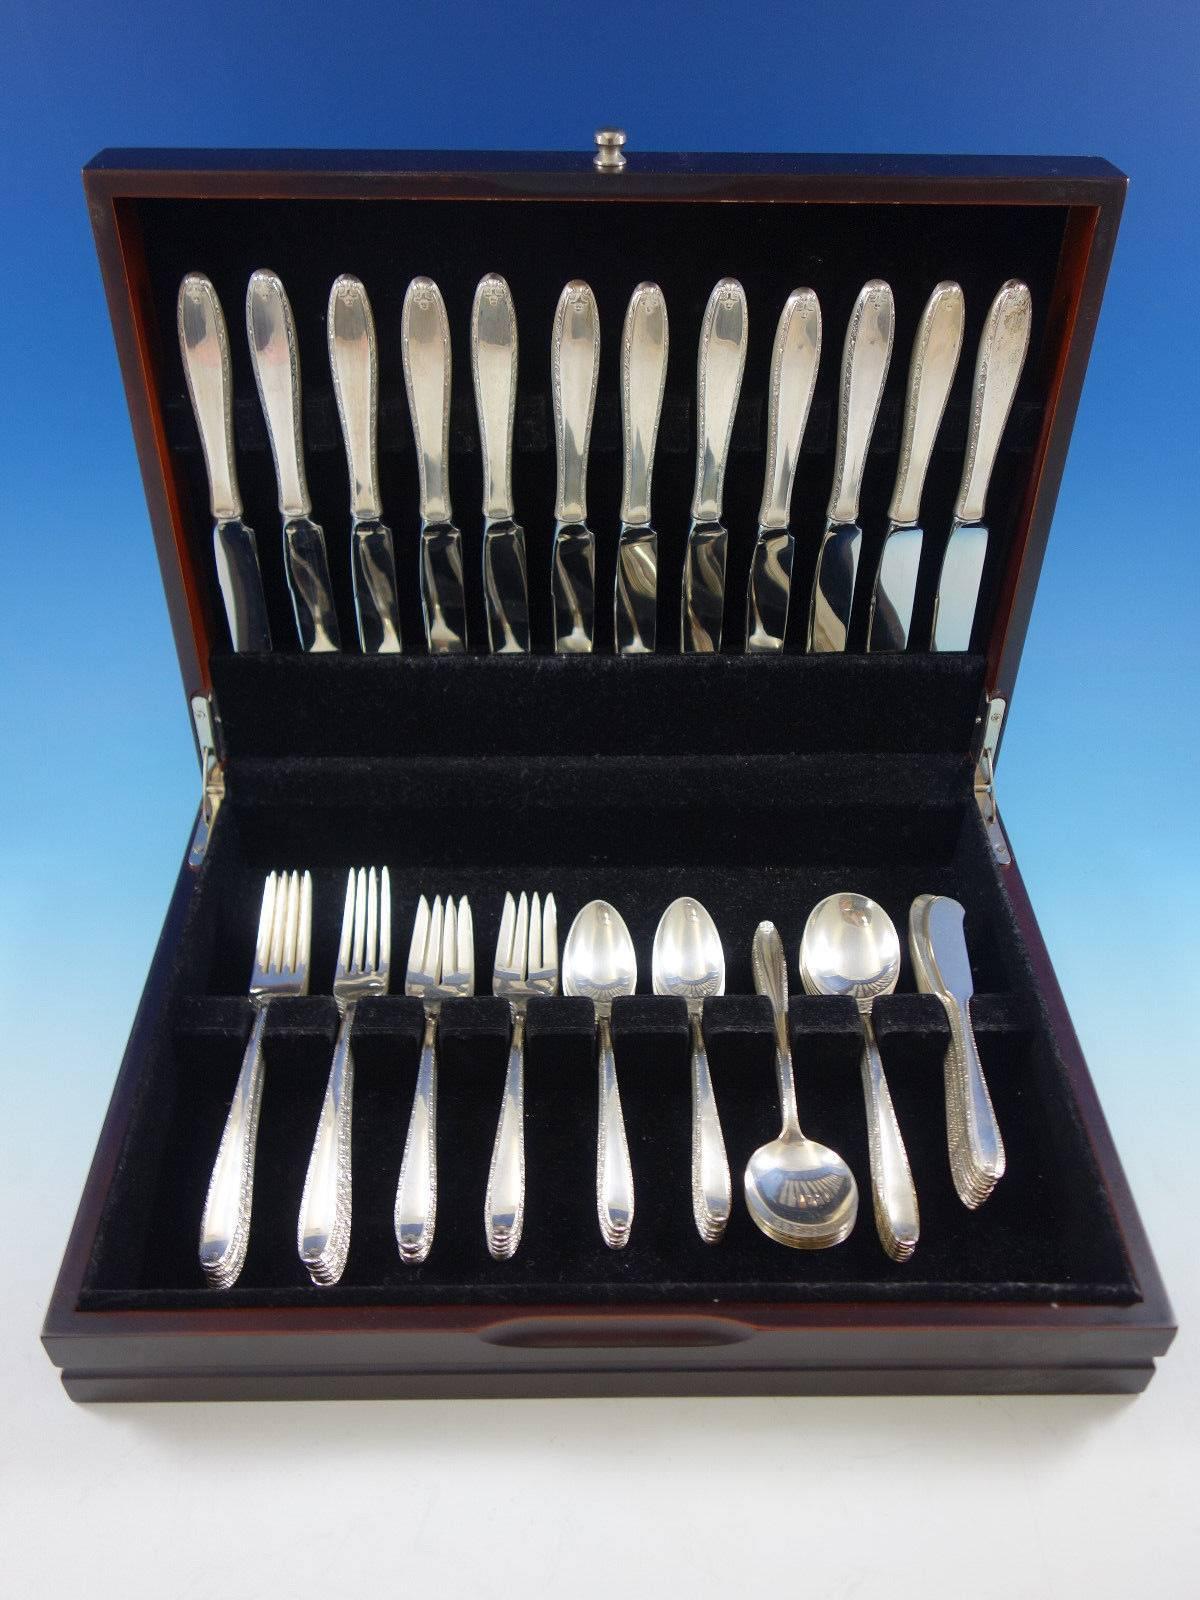 Southern Charm by Alvin sterling silver flatware set of 72 pieces. This set includes: 

12 knives, 9